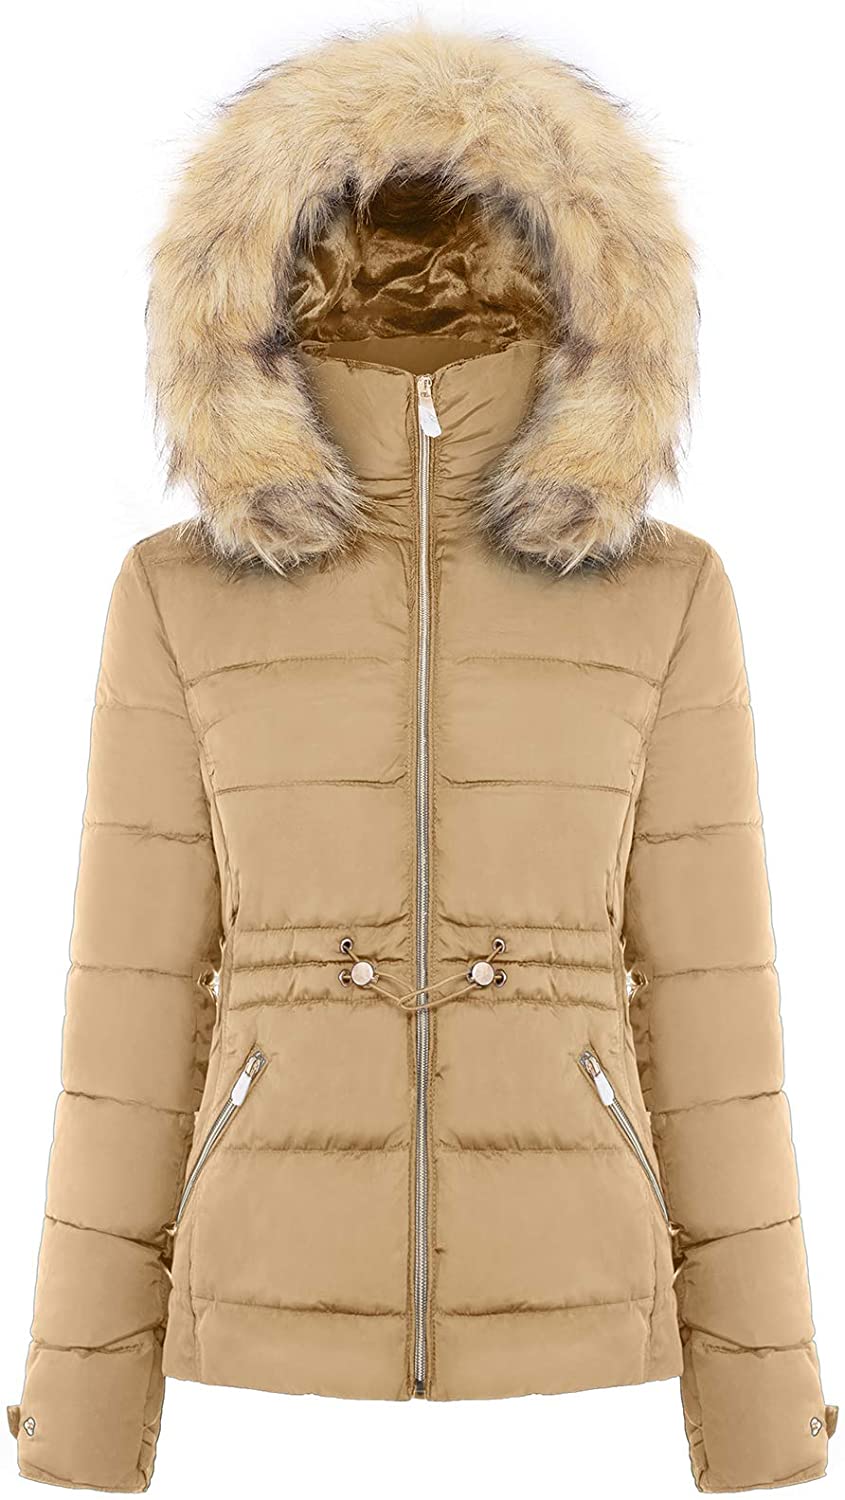 BodiLove Women\'s Winter Quilted Puffer Short Coat Jacket with Removable Faux  Fur | eBay